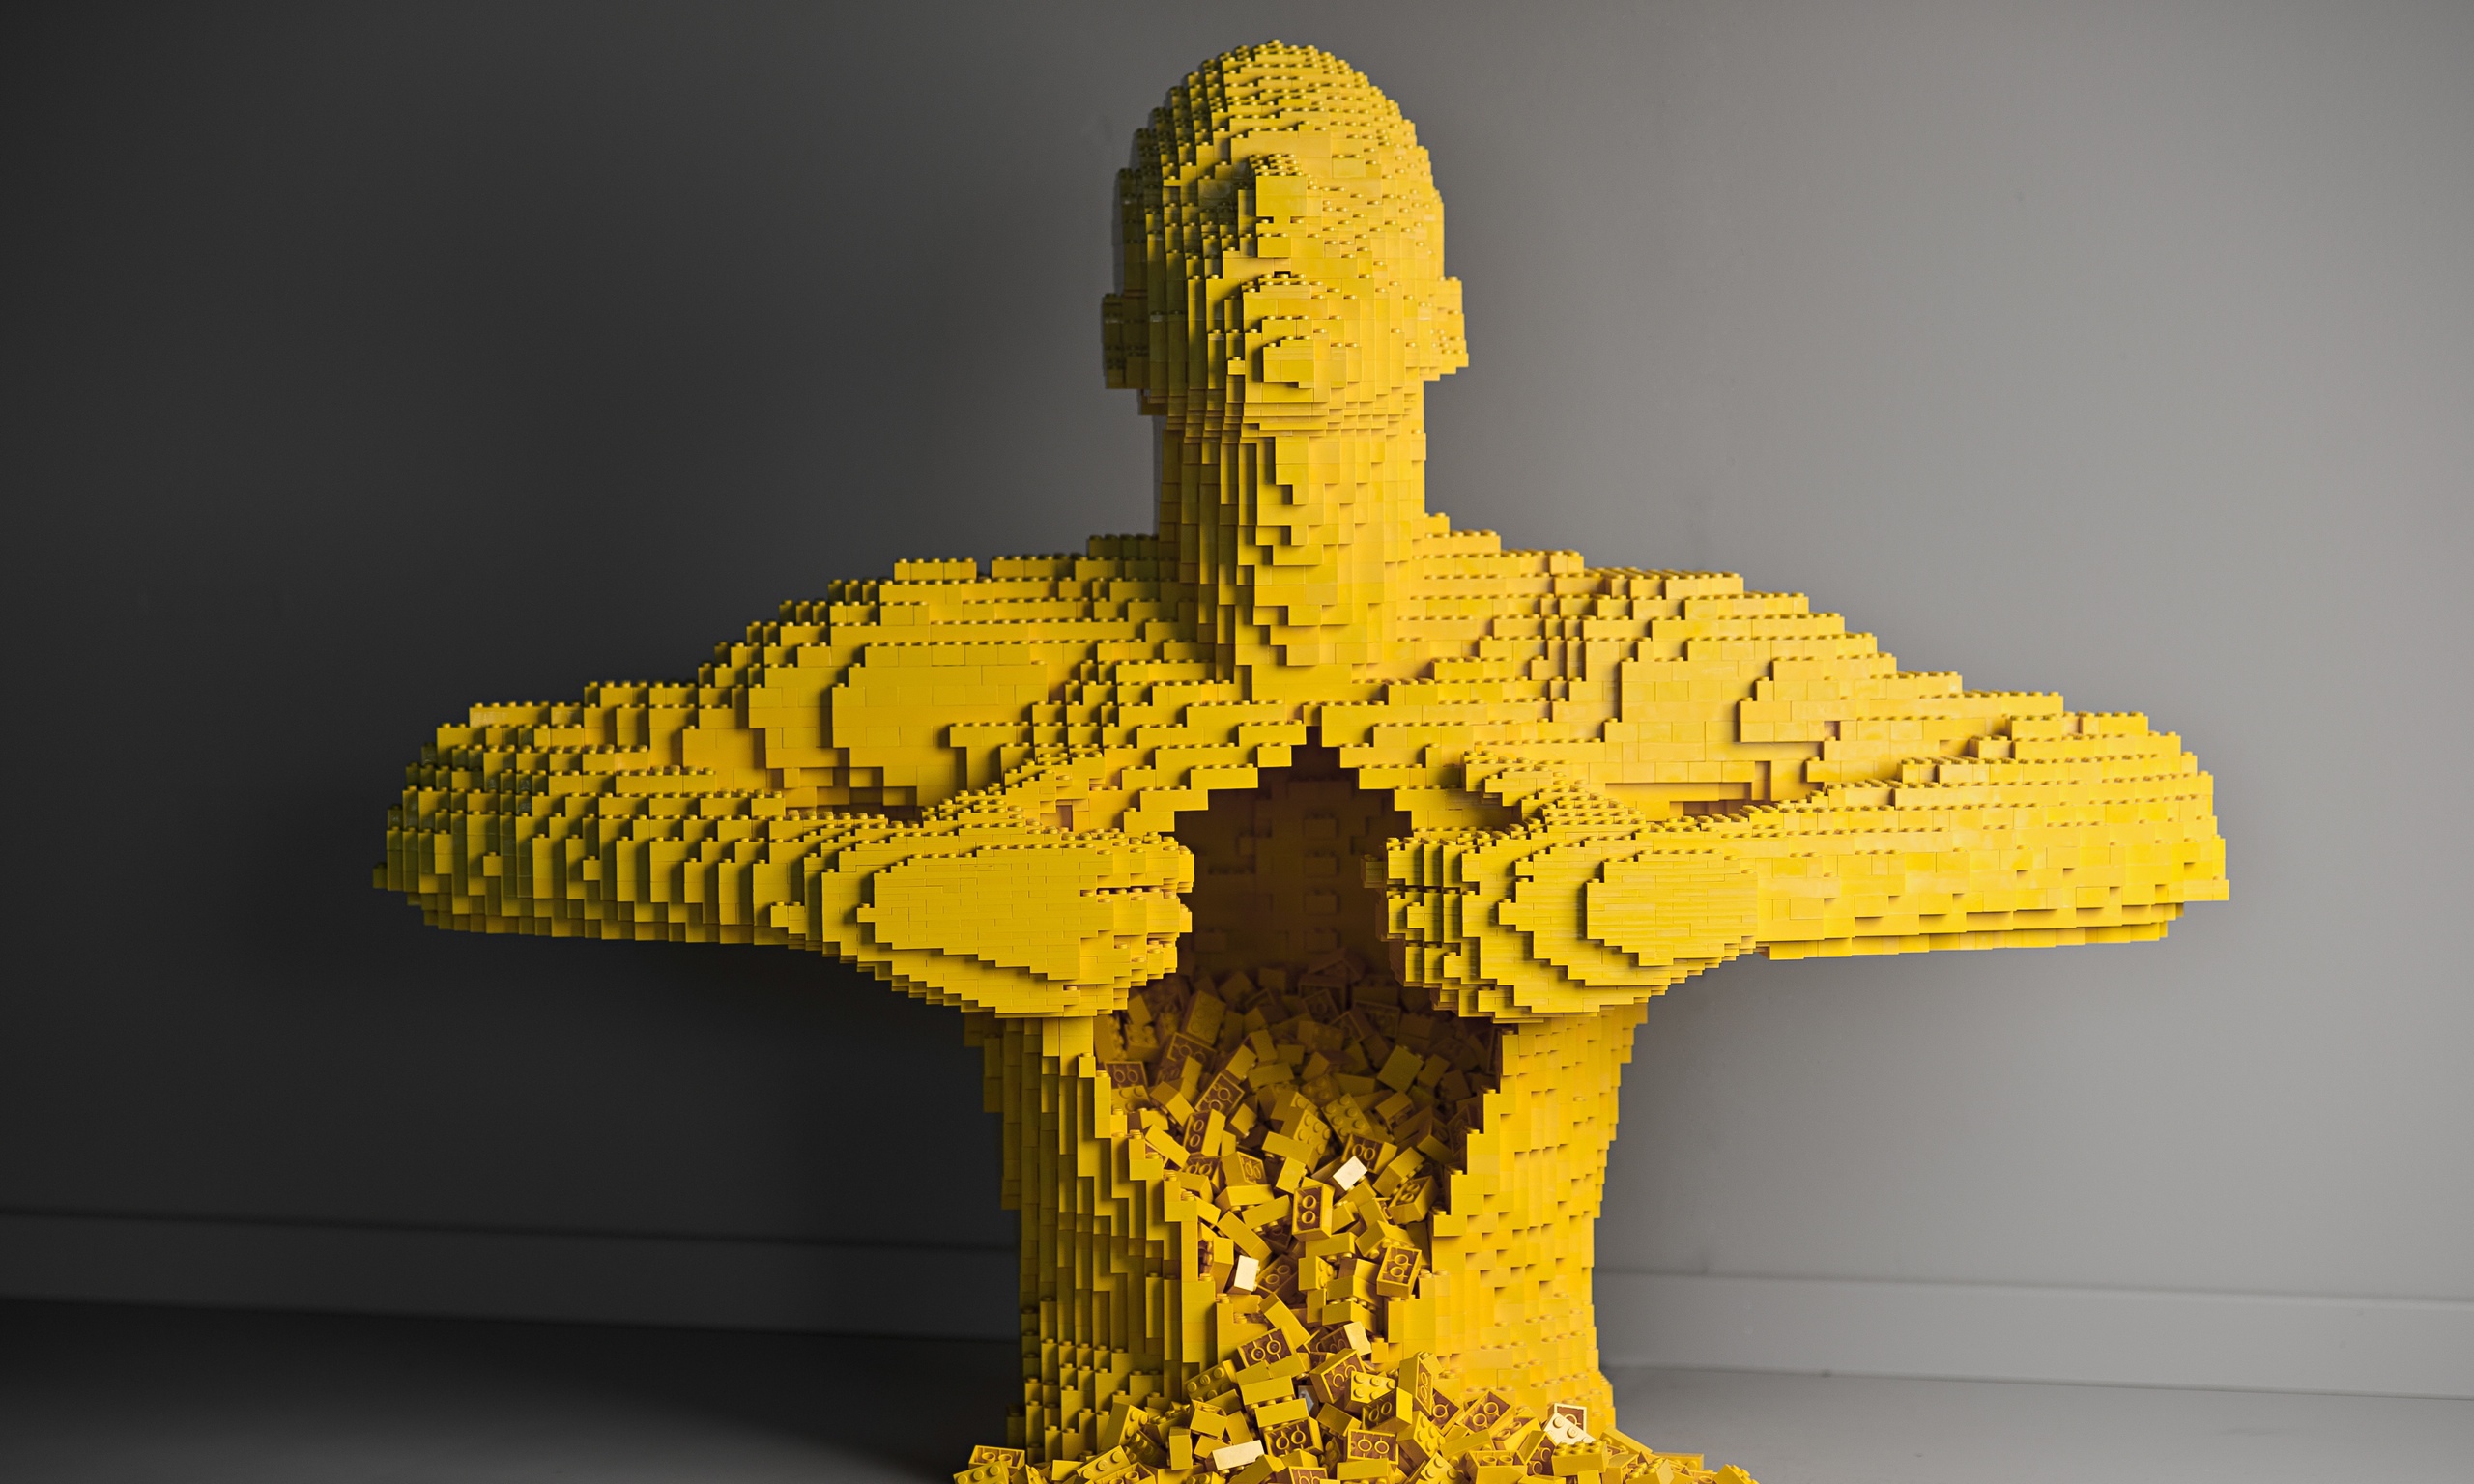 Lost in Lego: Art of the Brick displays more than 80 ...